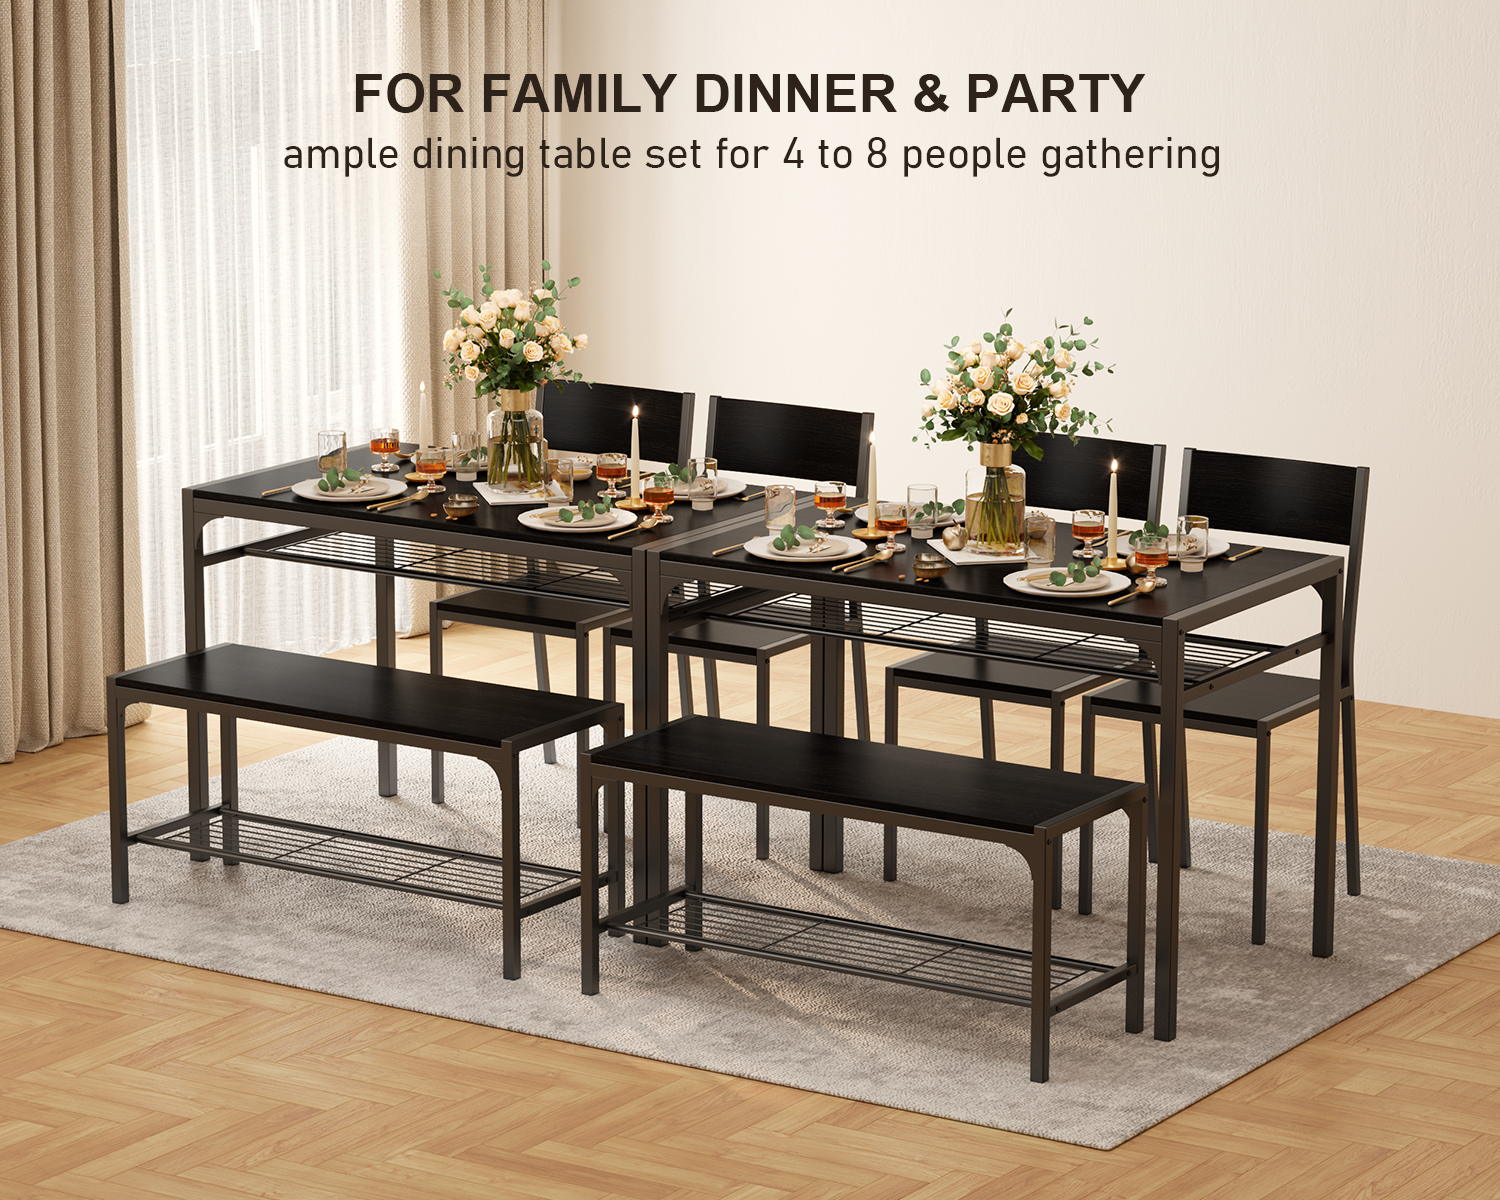 Gizoon TB44 Dining Table Set for 4 with Bench & 2 Chairs